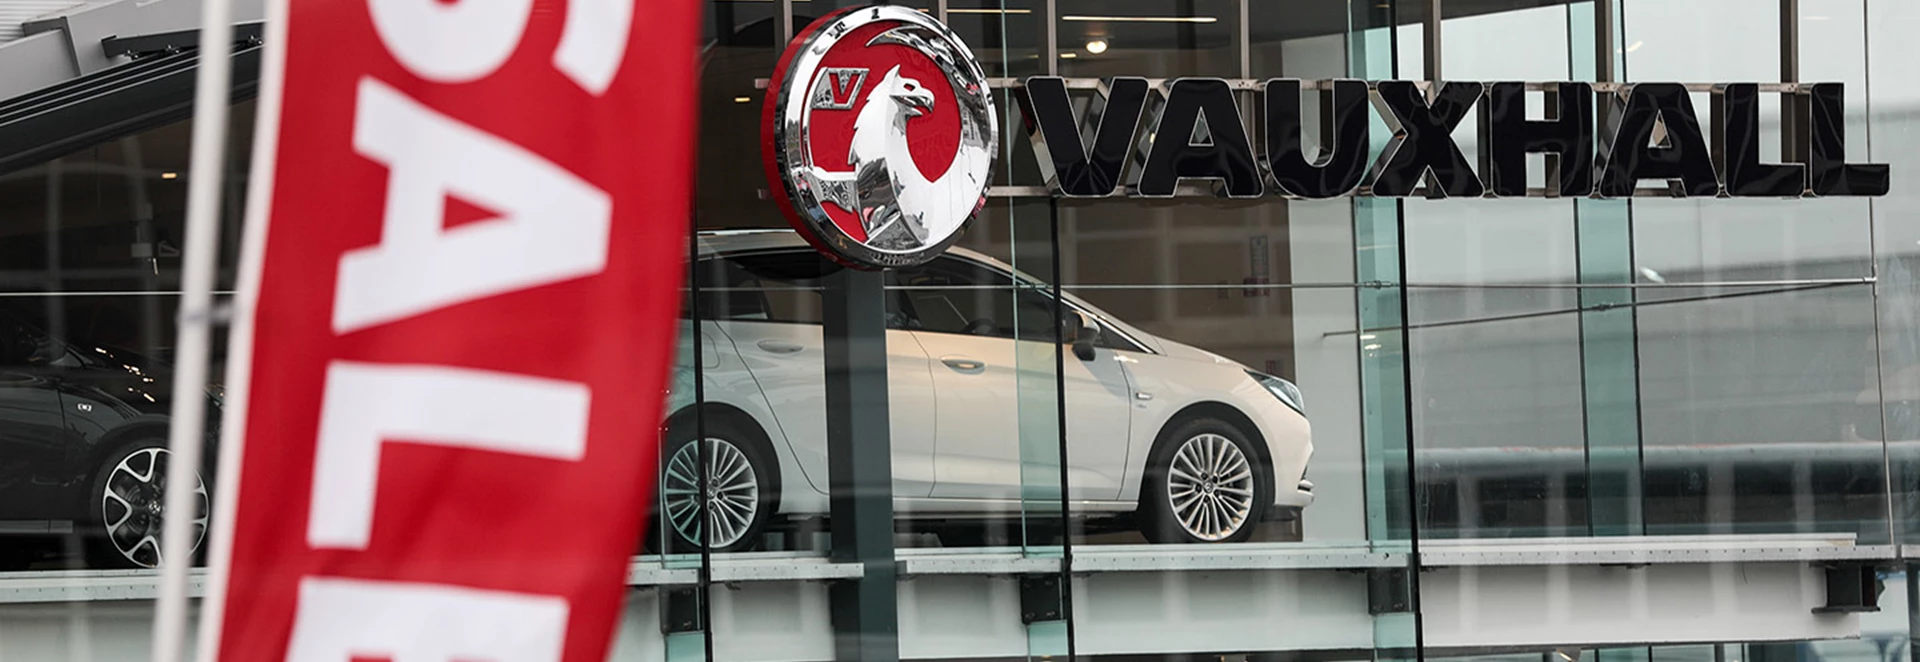 Peugeot and Citroen confirm deal to buy Vauxhall